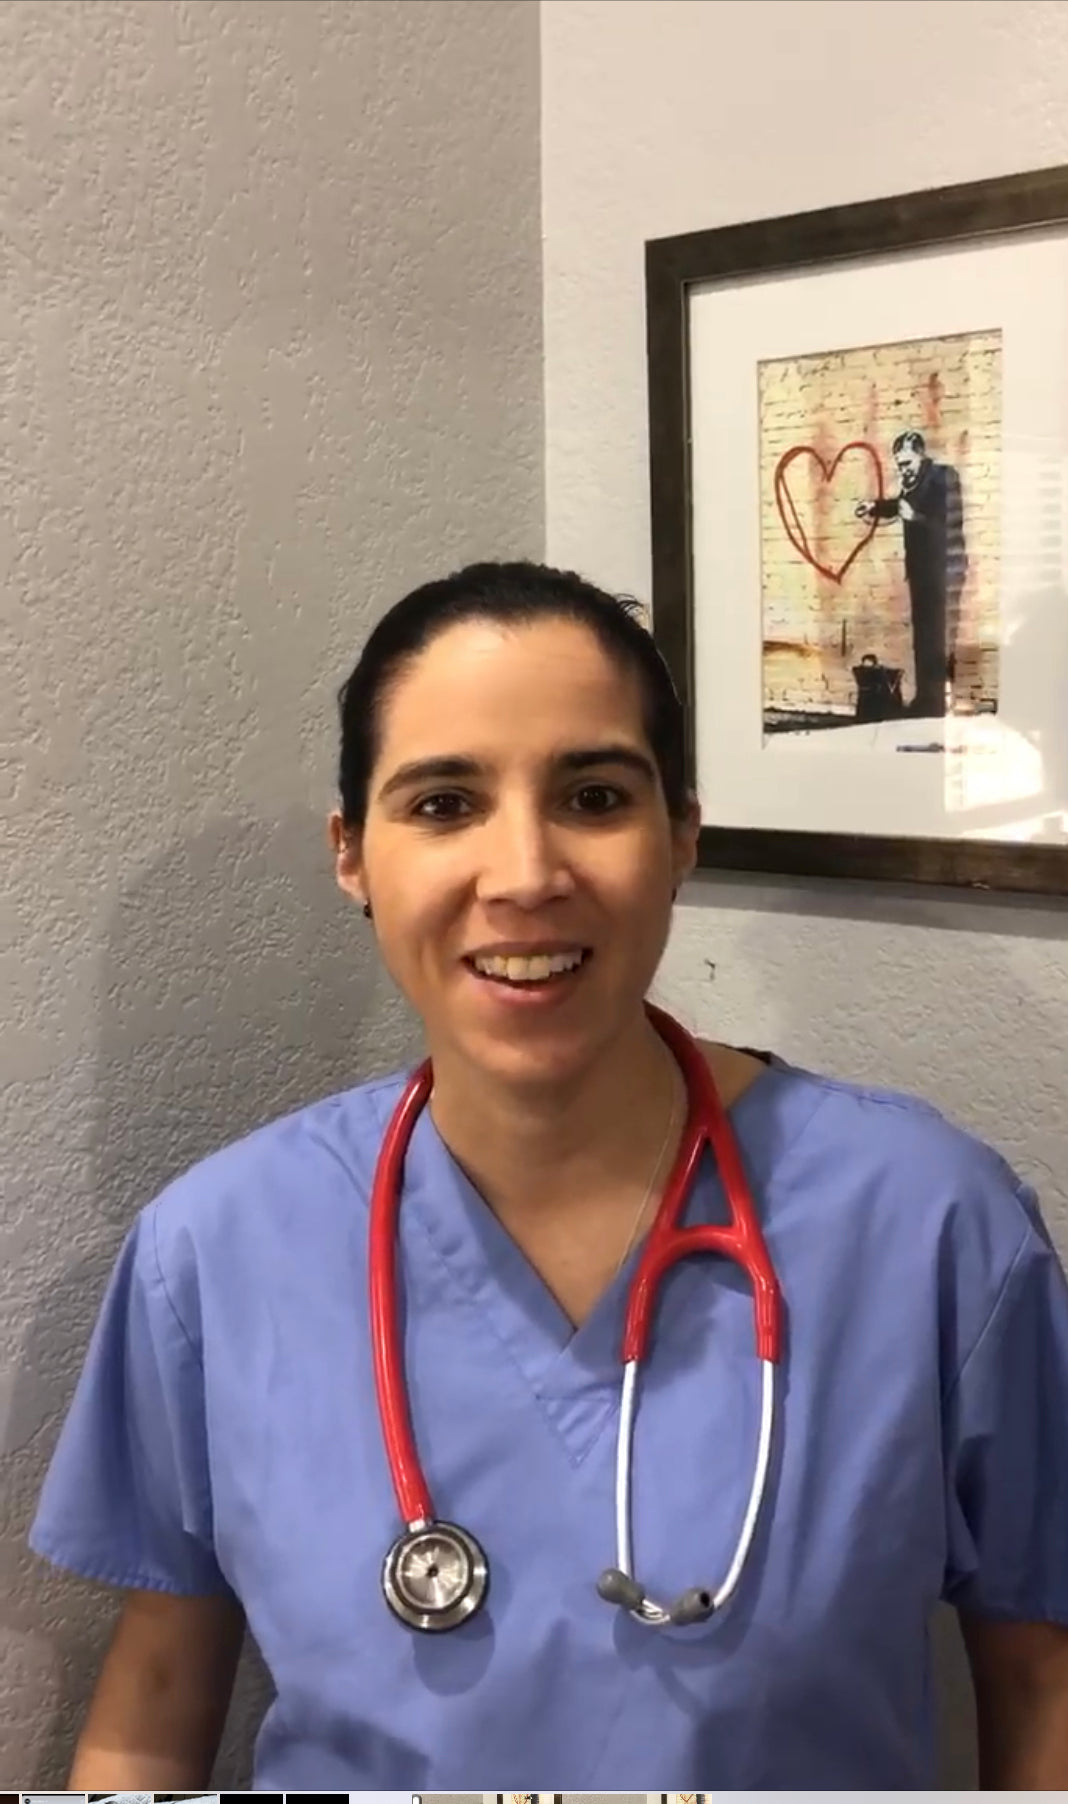 SOS Co-Founder Dr. Blanca Shares Her Update on COVID-19